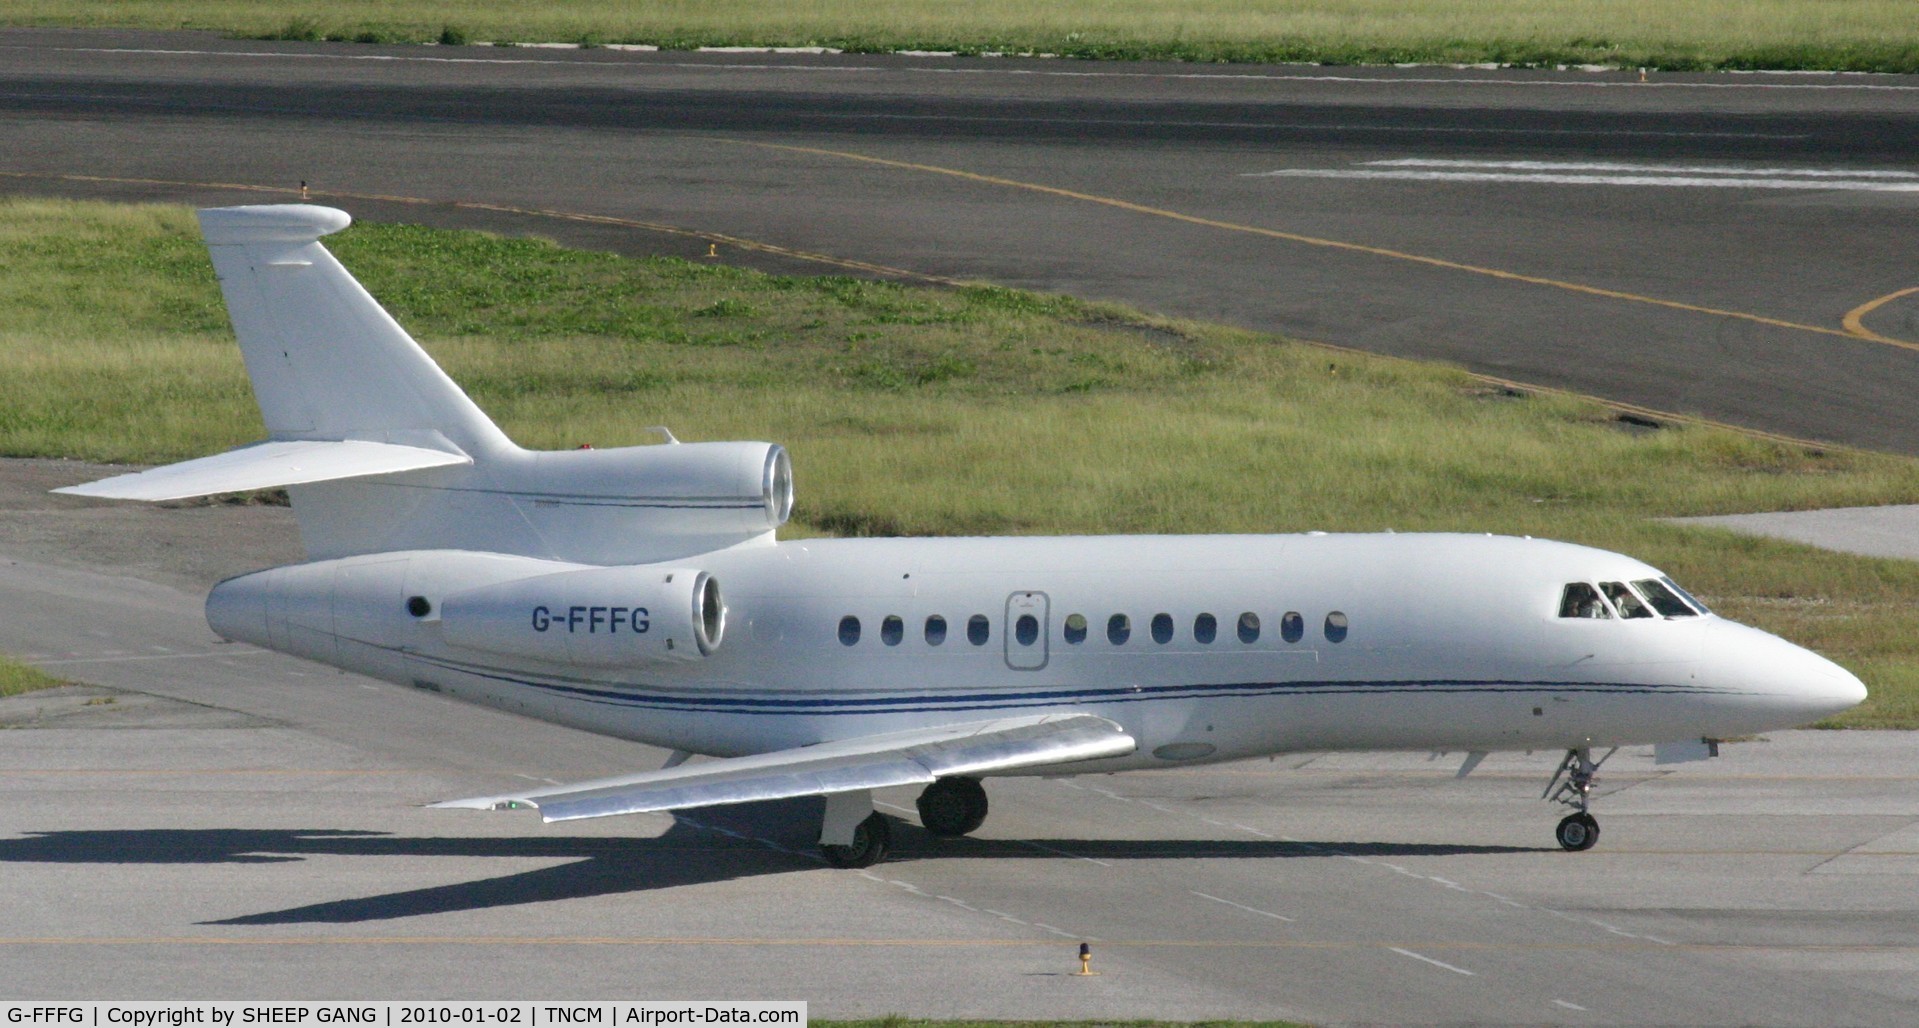 G-FFFG, 2005 Dassault Falcon 900EX C/N 155, G-FFFG taxig to the holding point alpha for take off